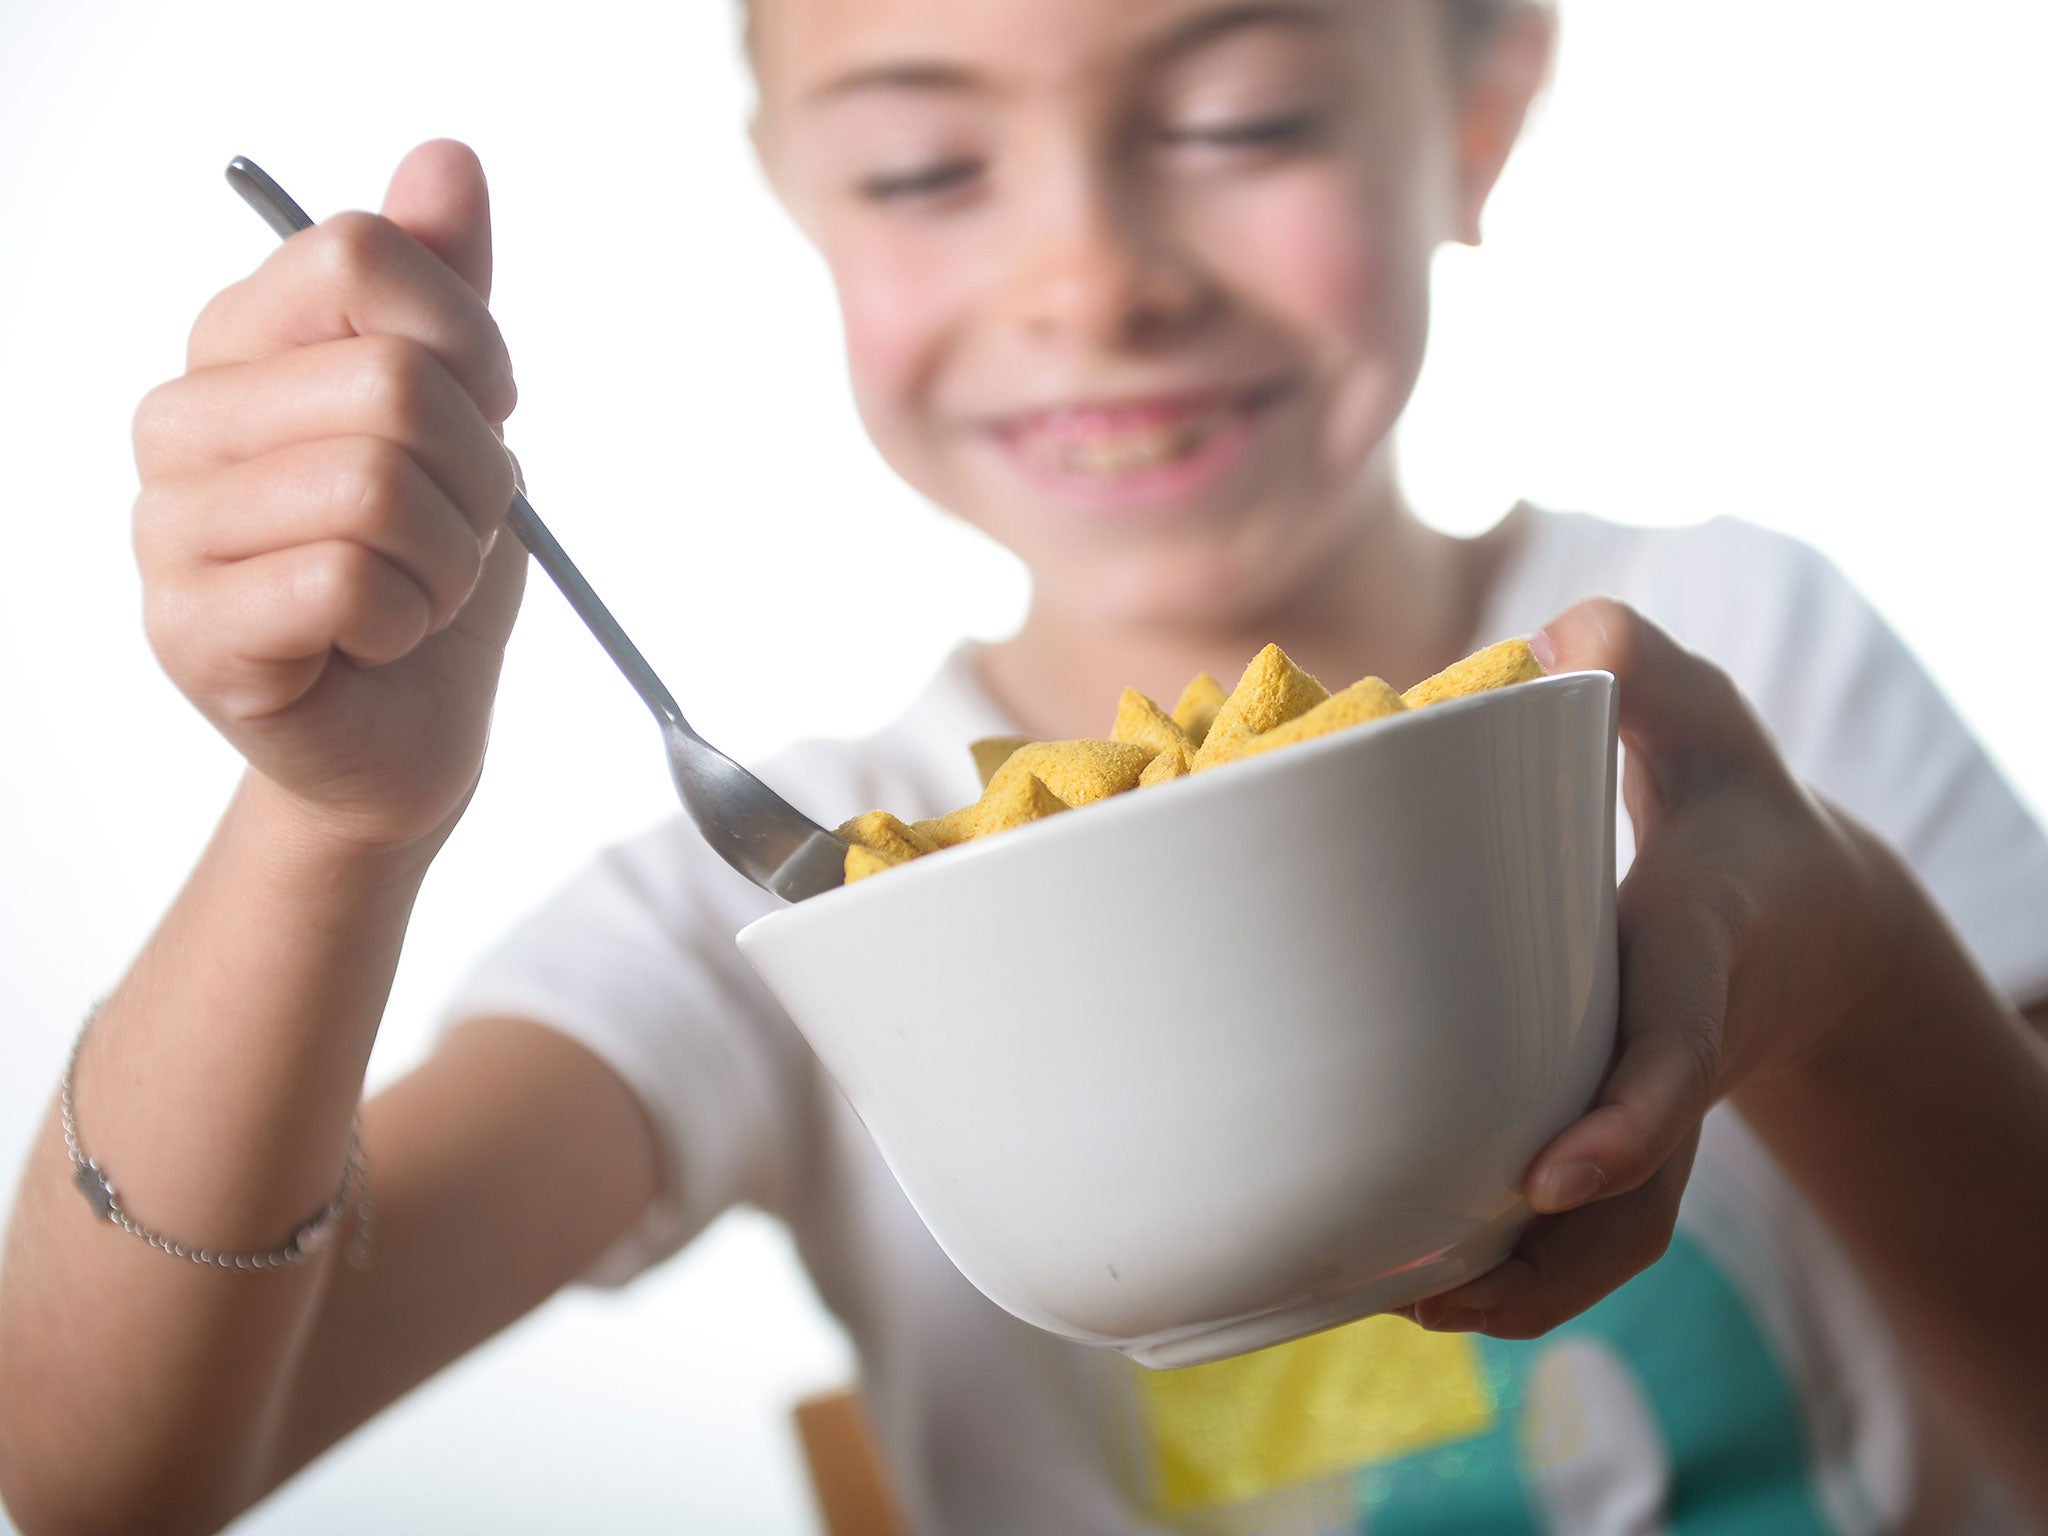 Parents could be giving their children cereals containing high amounts of sugar